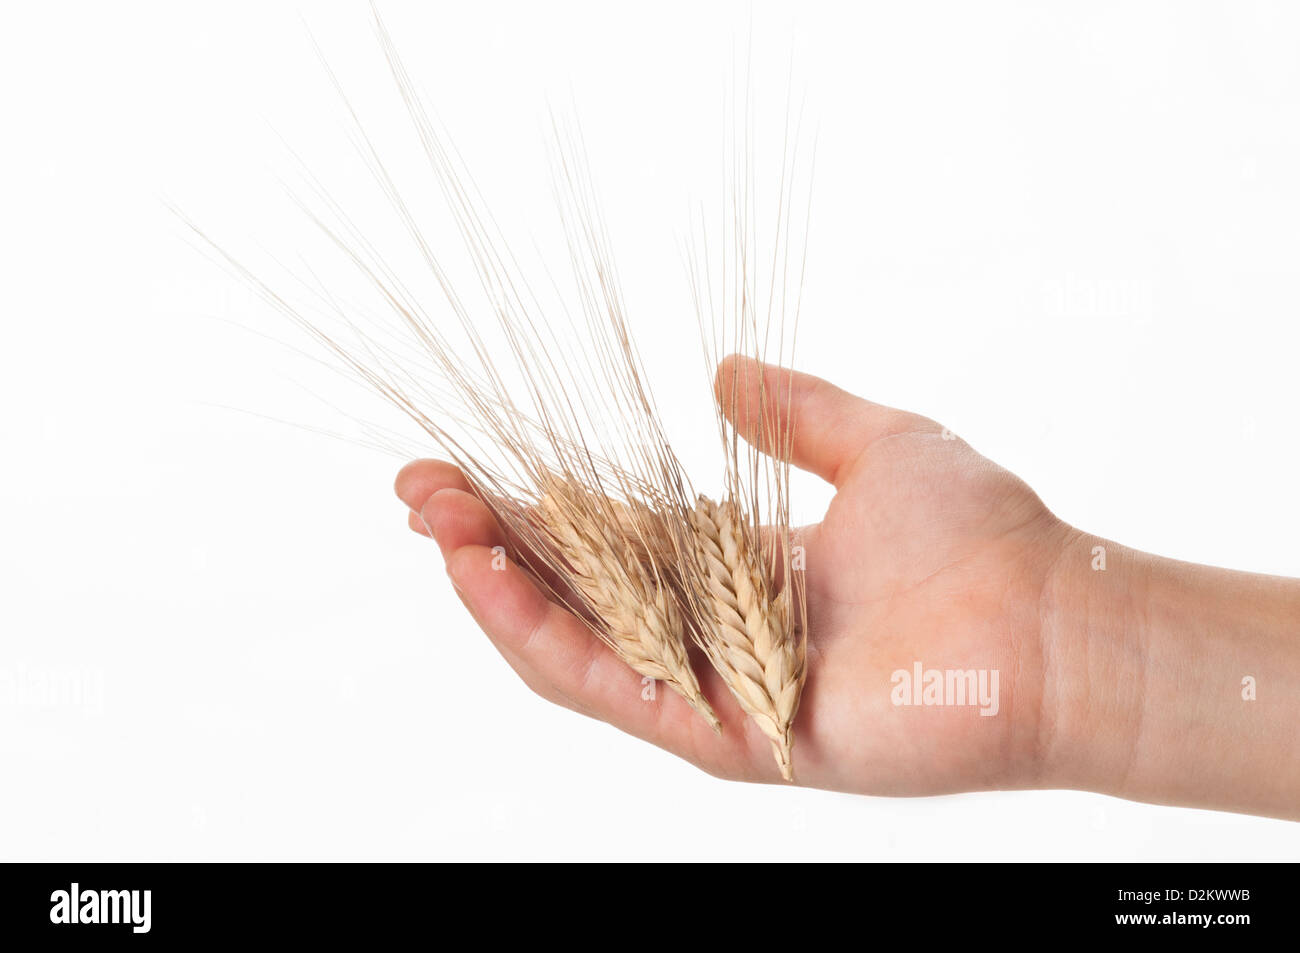 Hand holding  two ear of wheat (Triticum spp.) Stock Photo